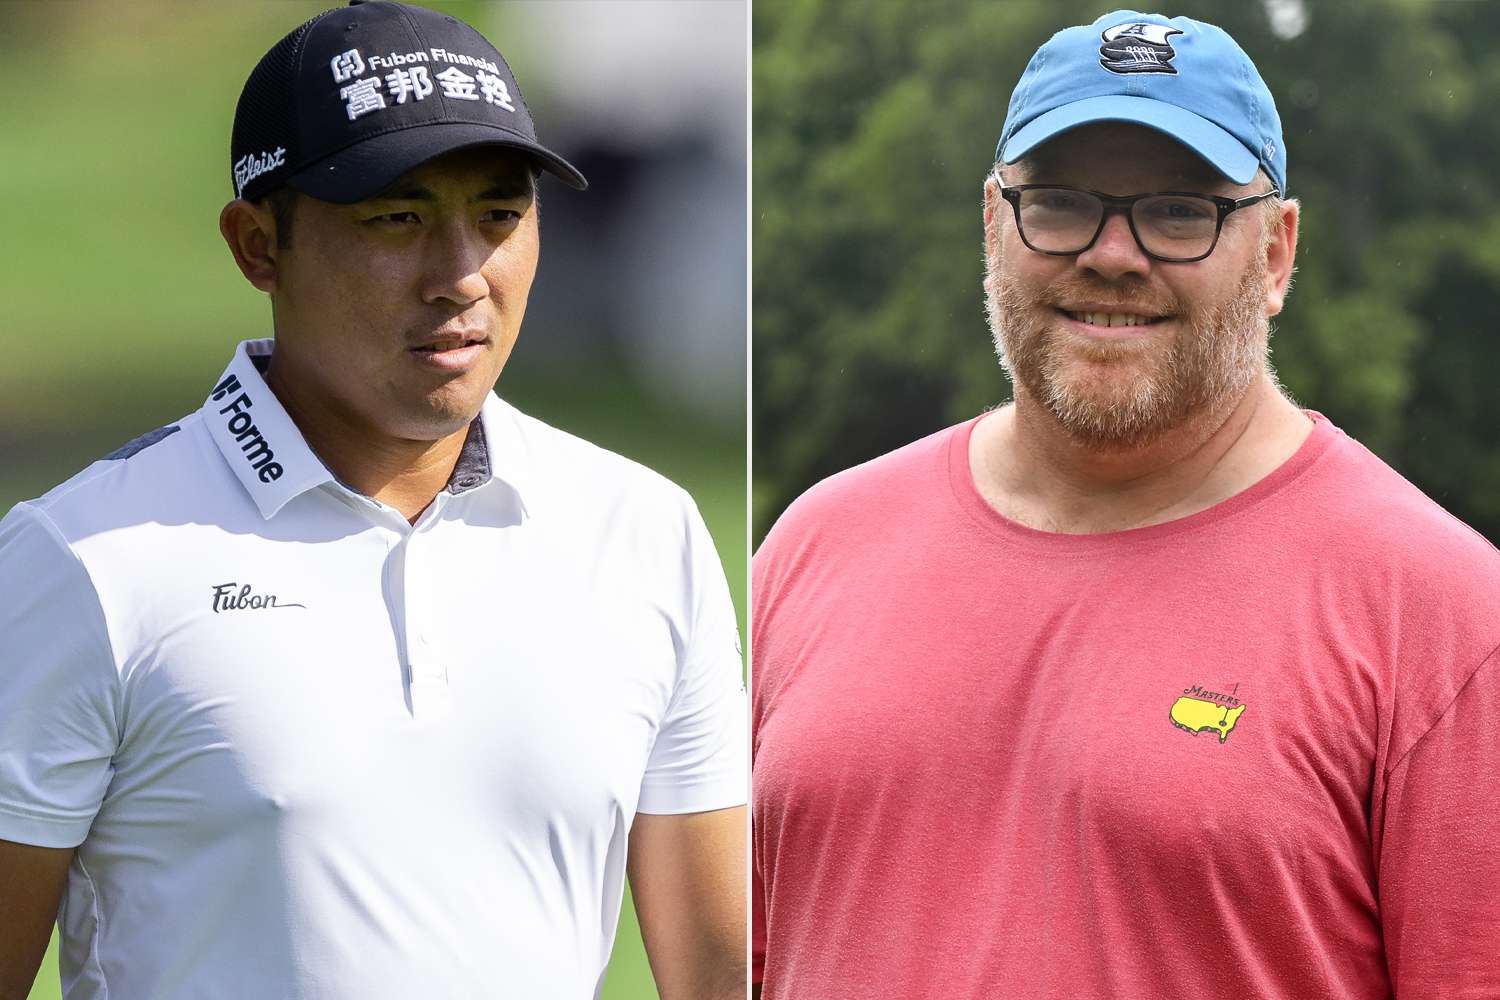 Pro Golfer C.T. Pan Agrees to Let a Fan Carry His Clubs After His Caddie Is Injured in Fall